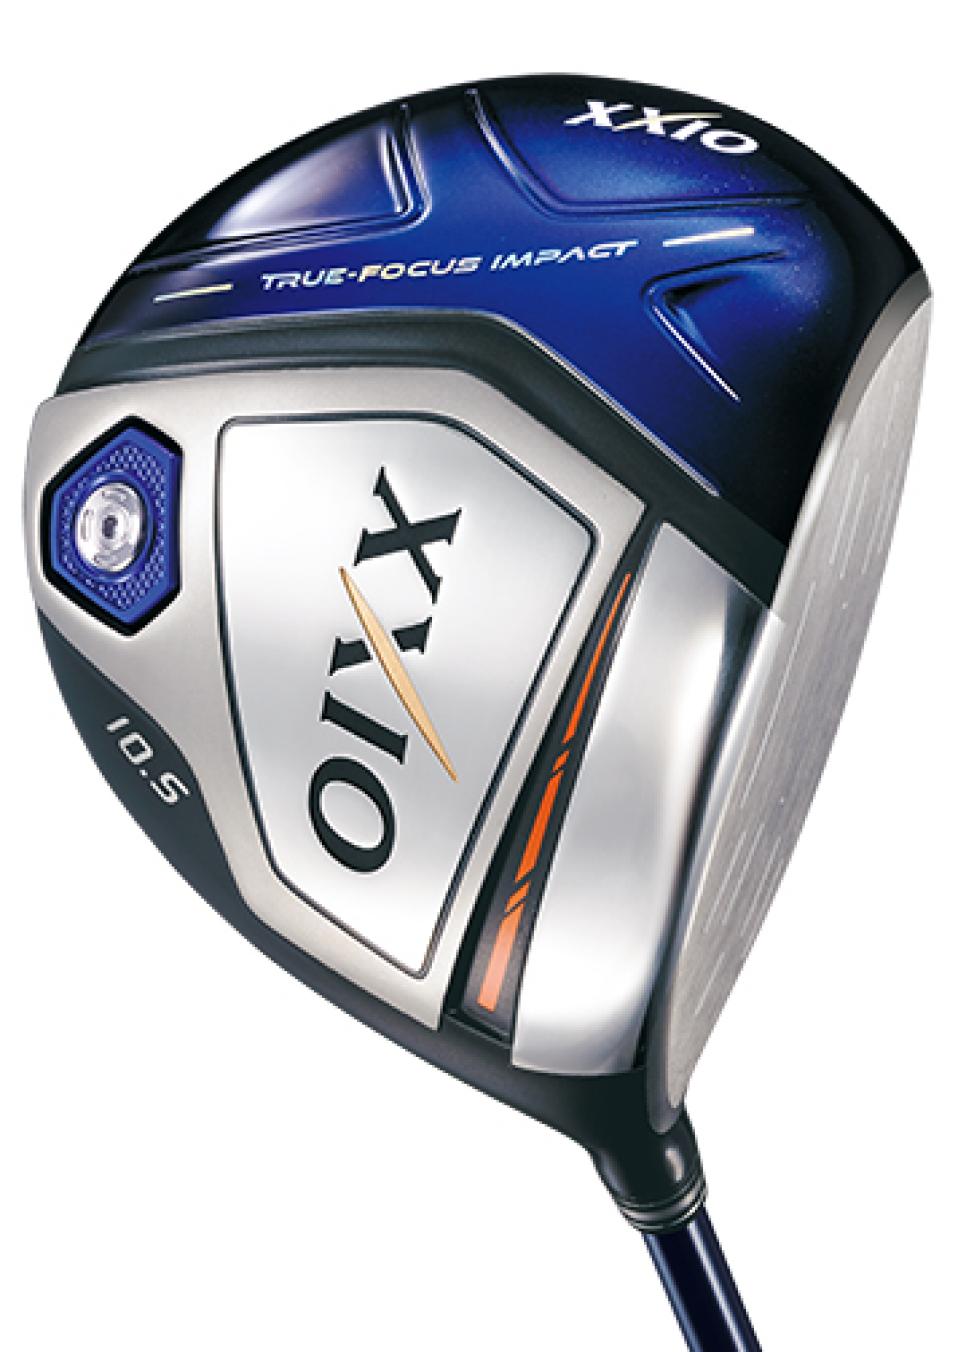 XXIO X line of woods, irons attempt to make your old swing better